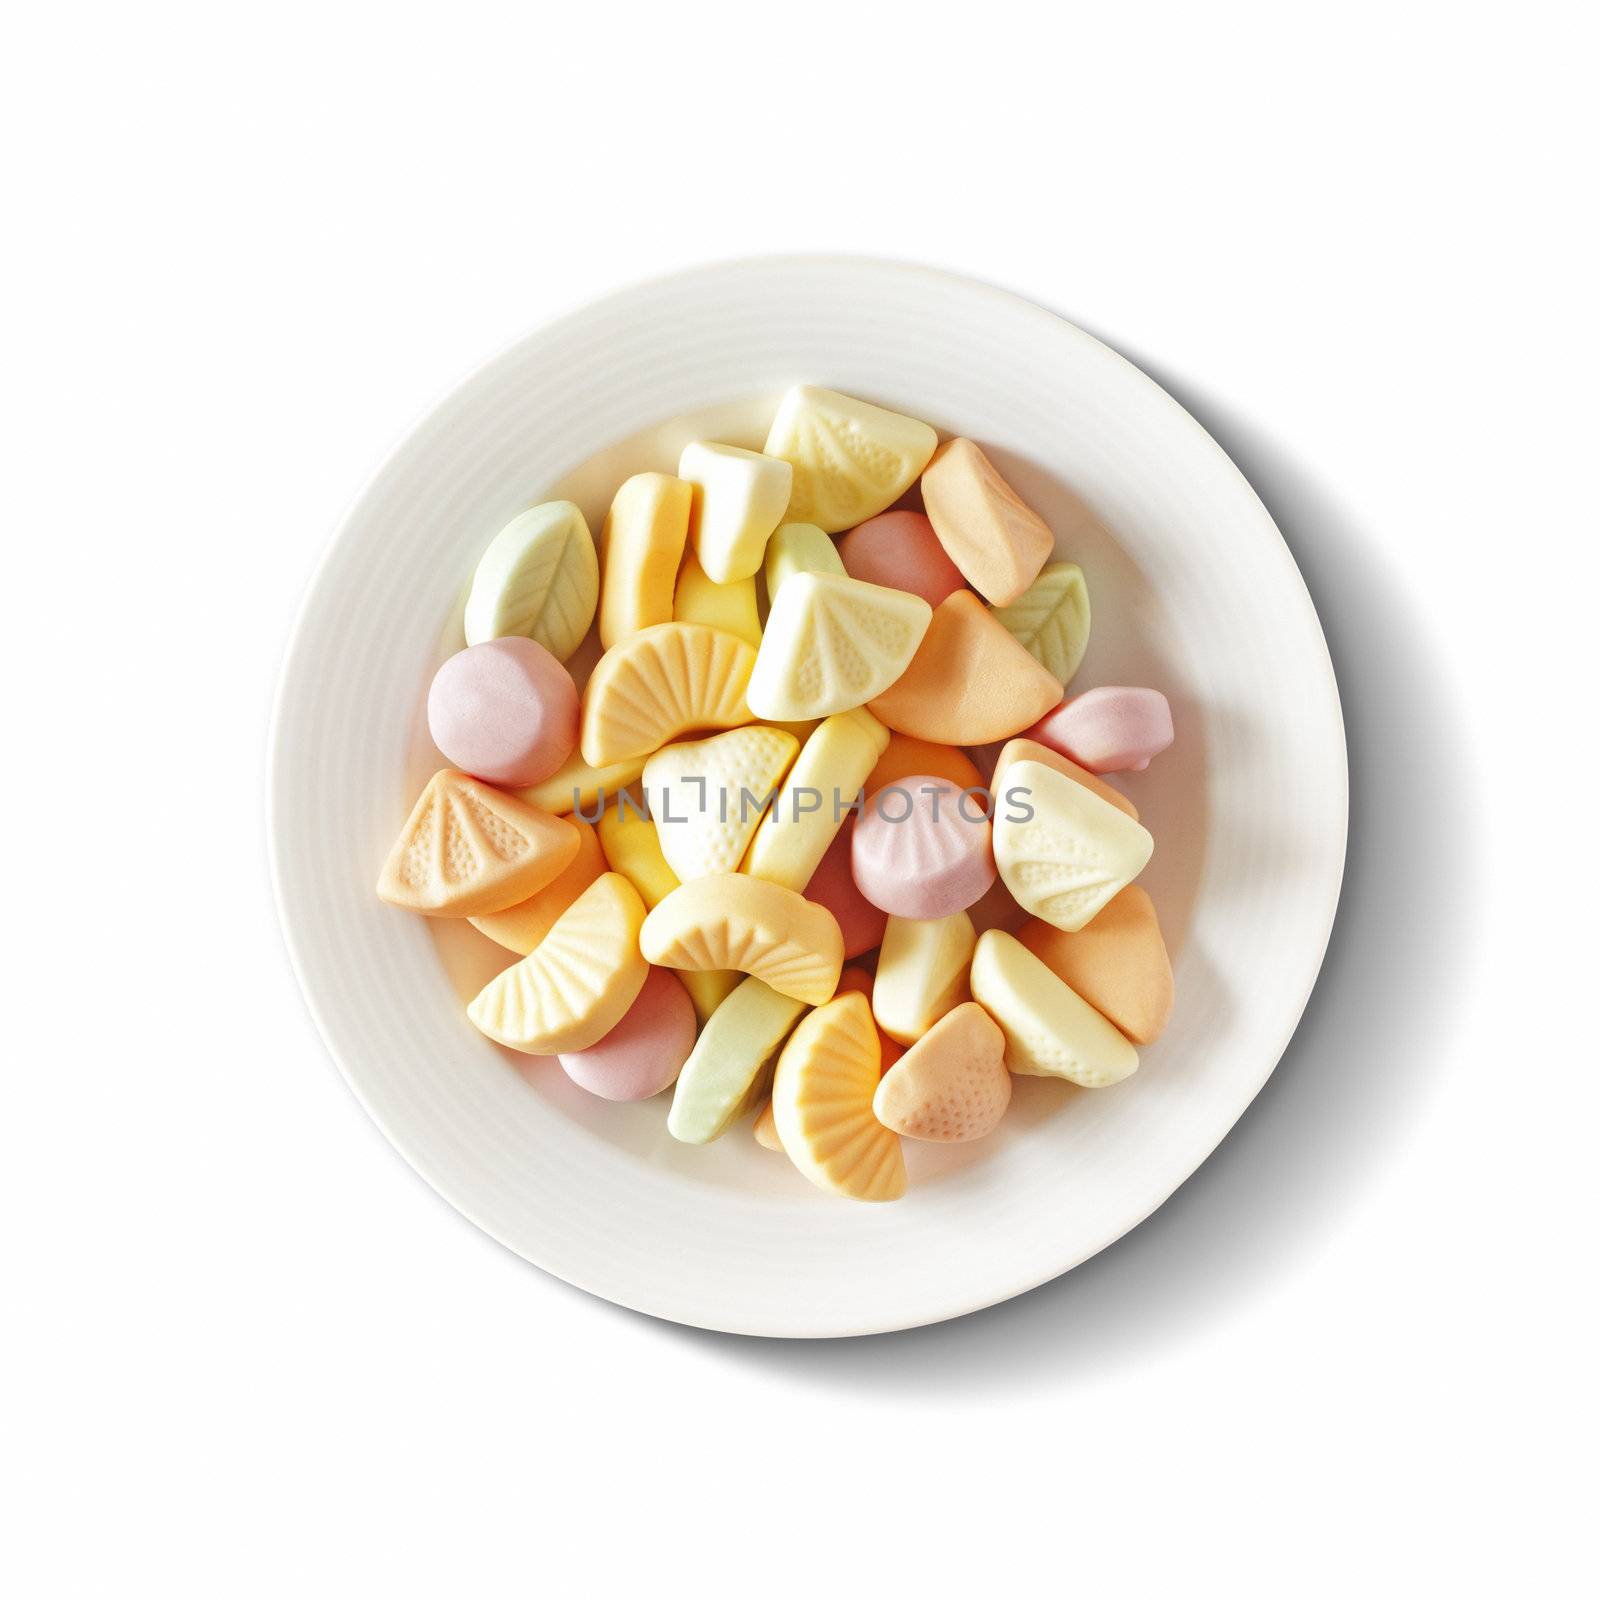 An image of a plate full of sweets